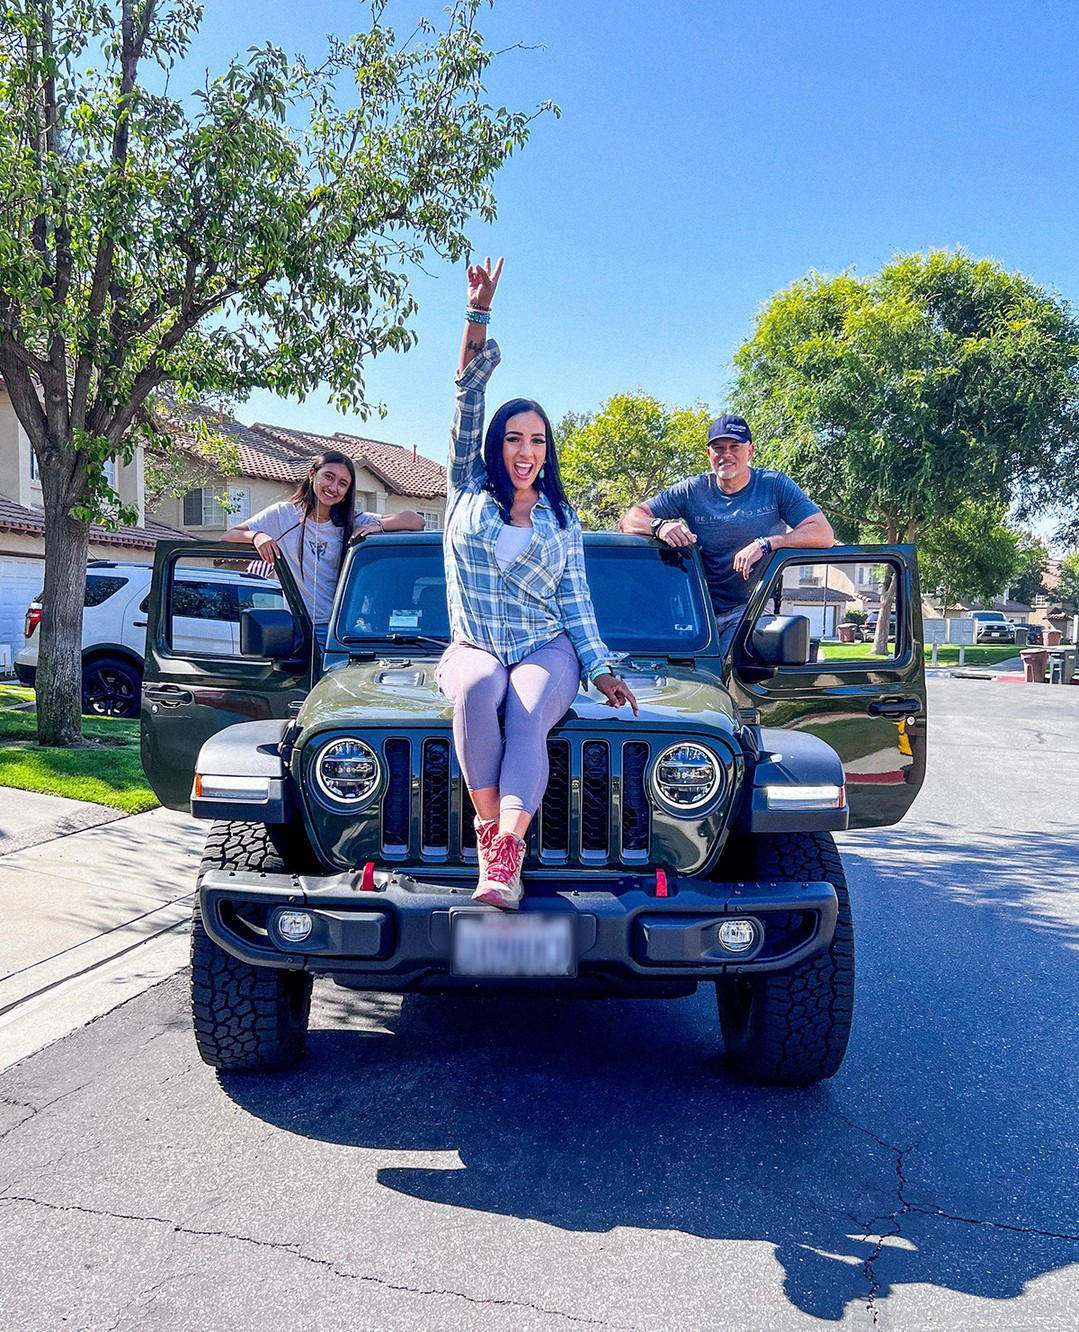 Jeep - Love of adventure runs in the family